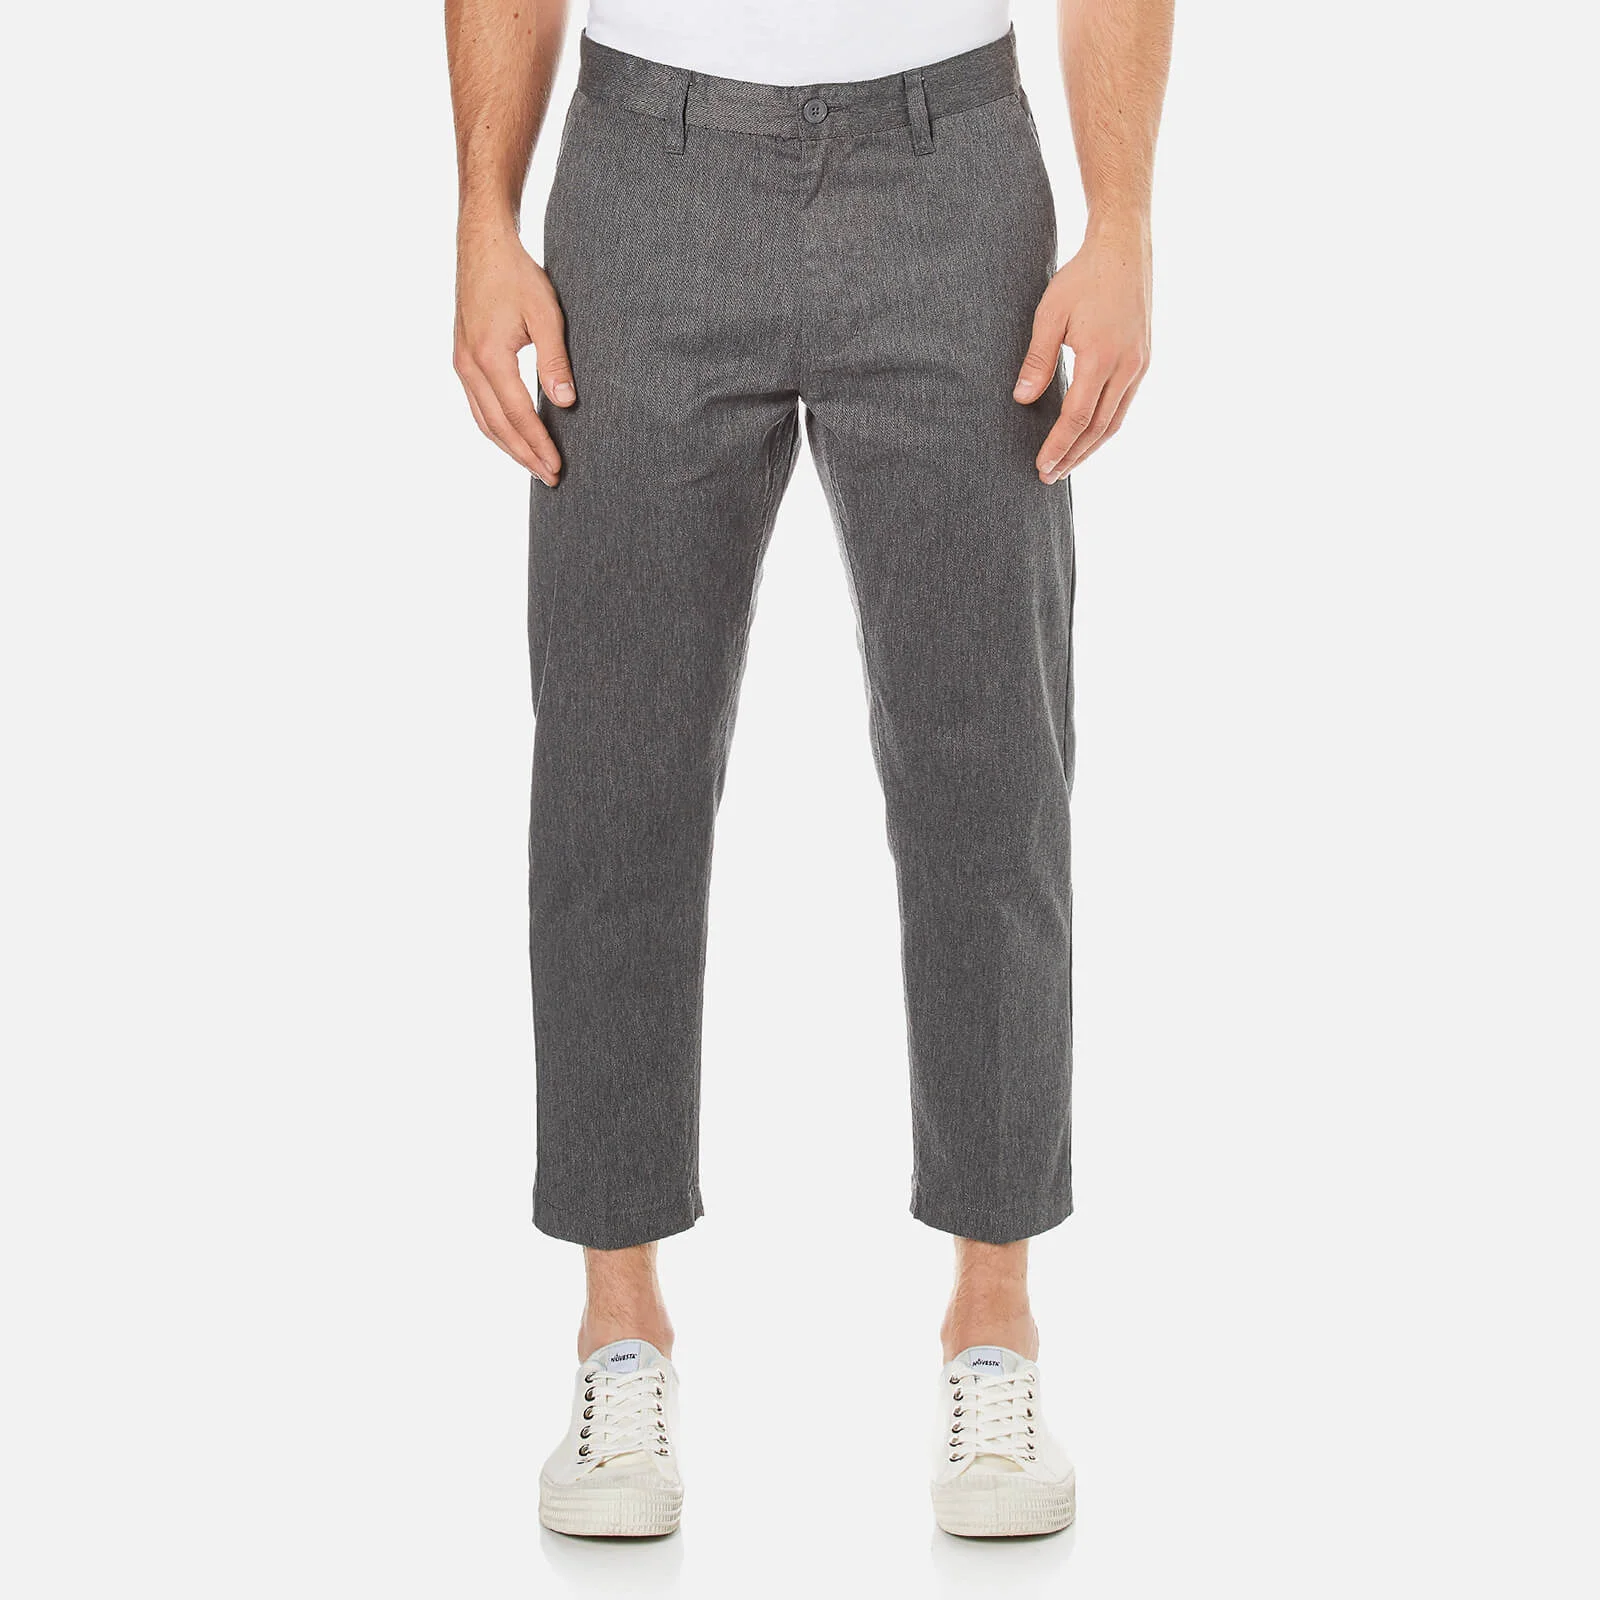 OBEY Clothing Men's Straggler Flooded Crop Trousers - Heather Grey Image 1